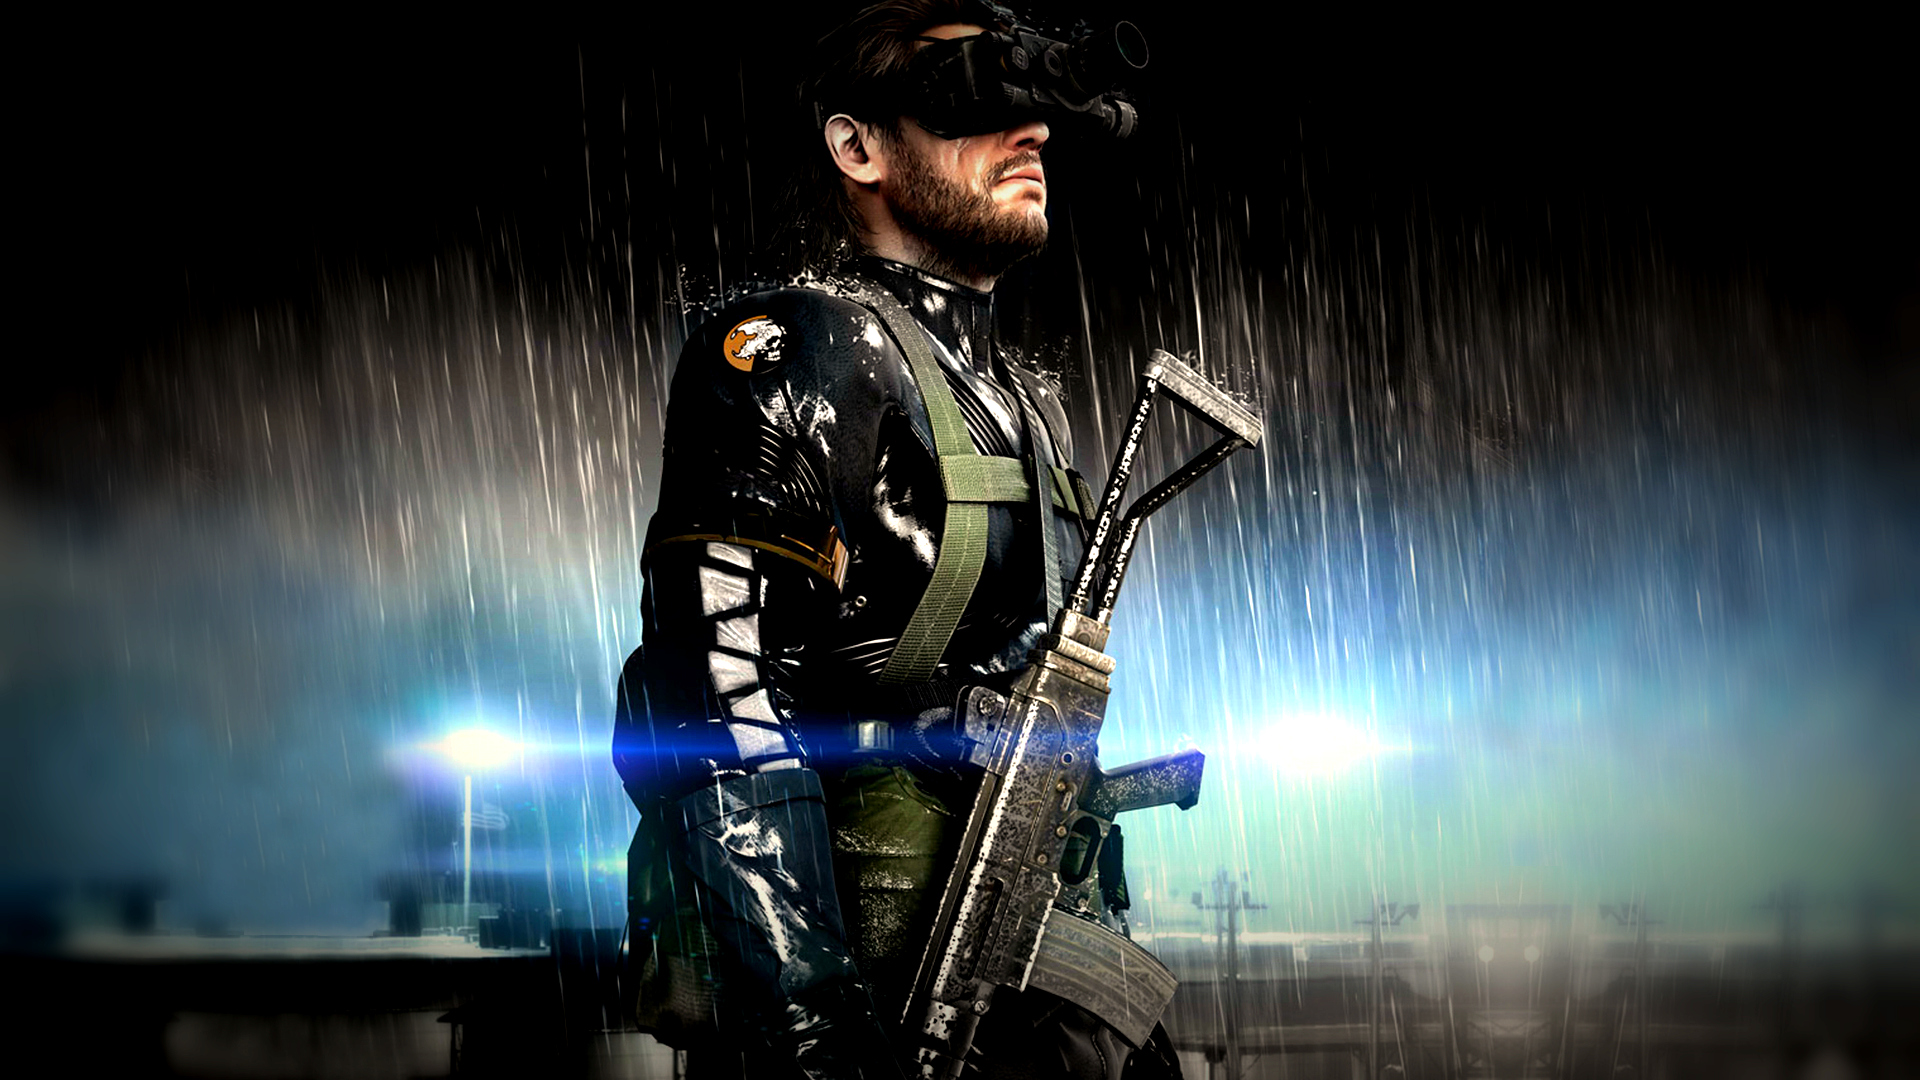 metal gear, video game images